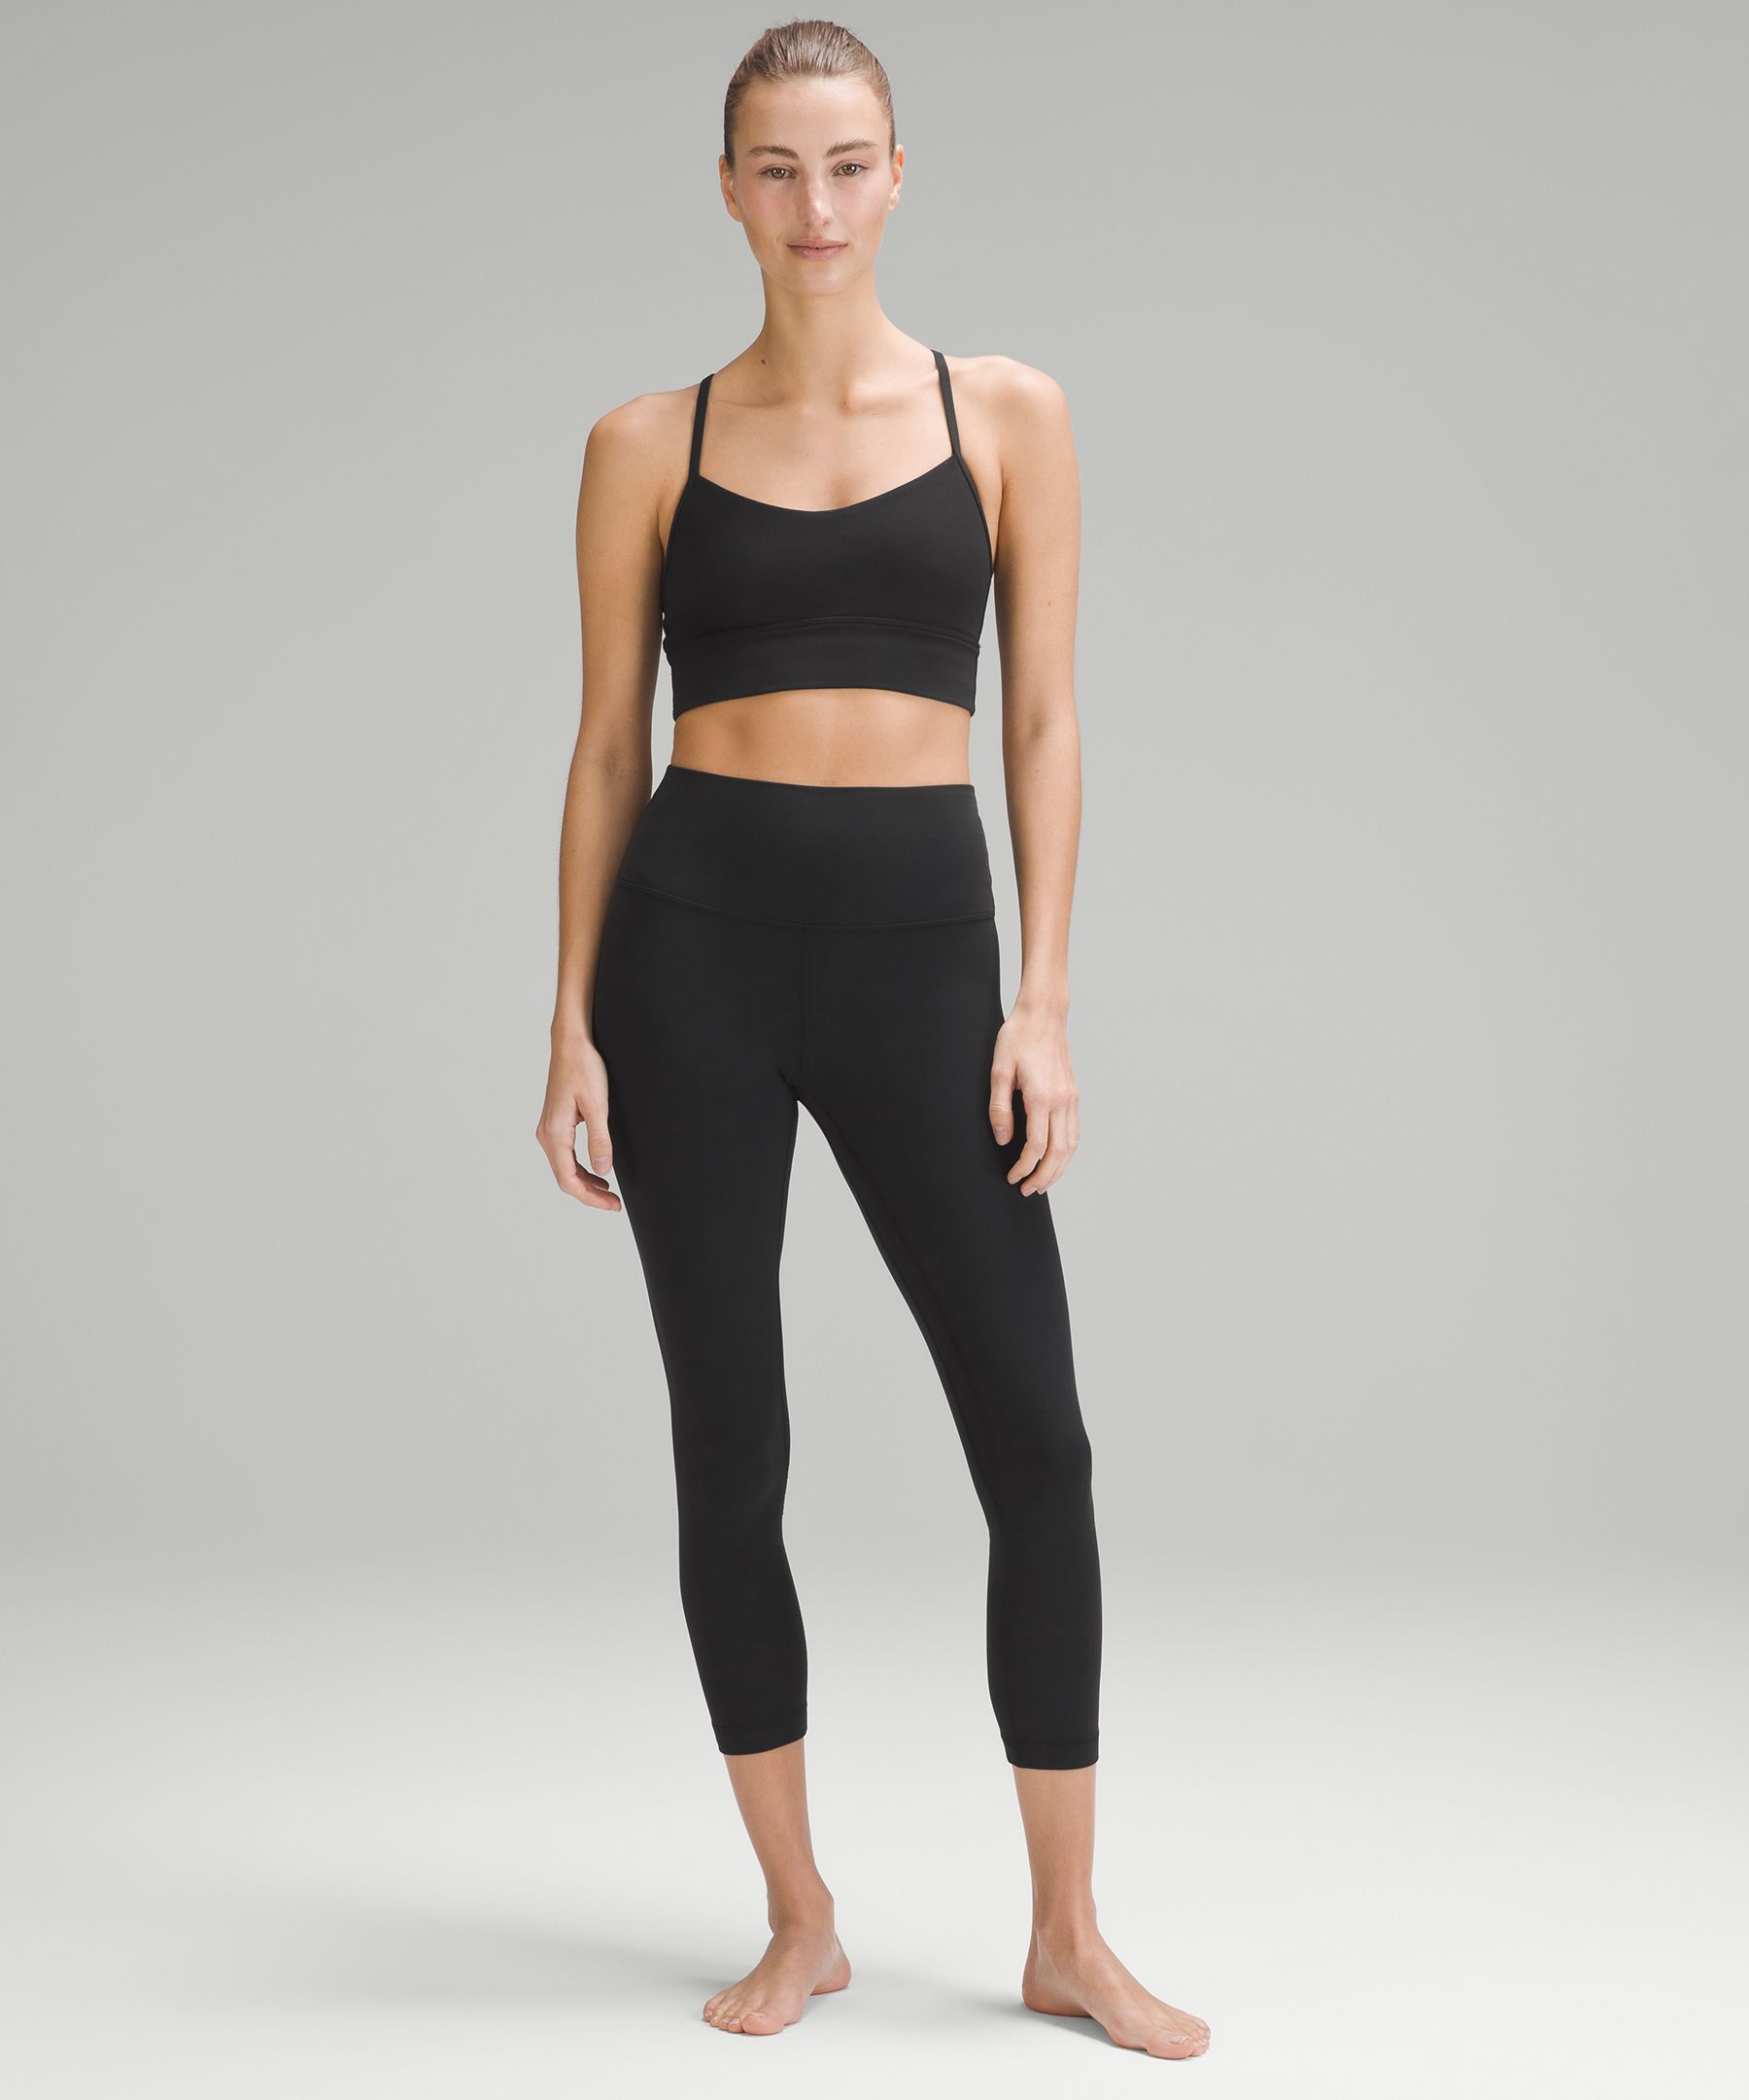 Lululemon Align Leggings Black Size 8 - $66 (32% Off Retail) New With Tags  - From Bailey